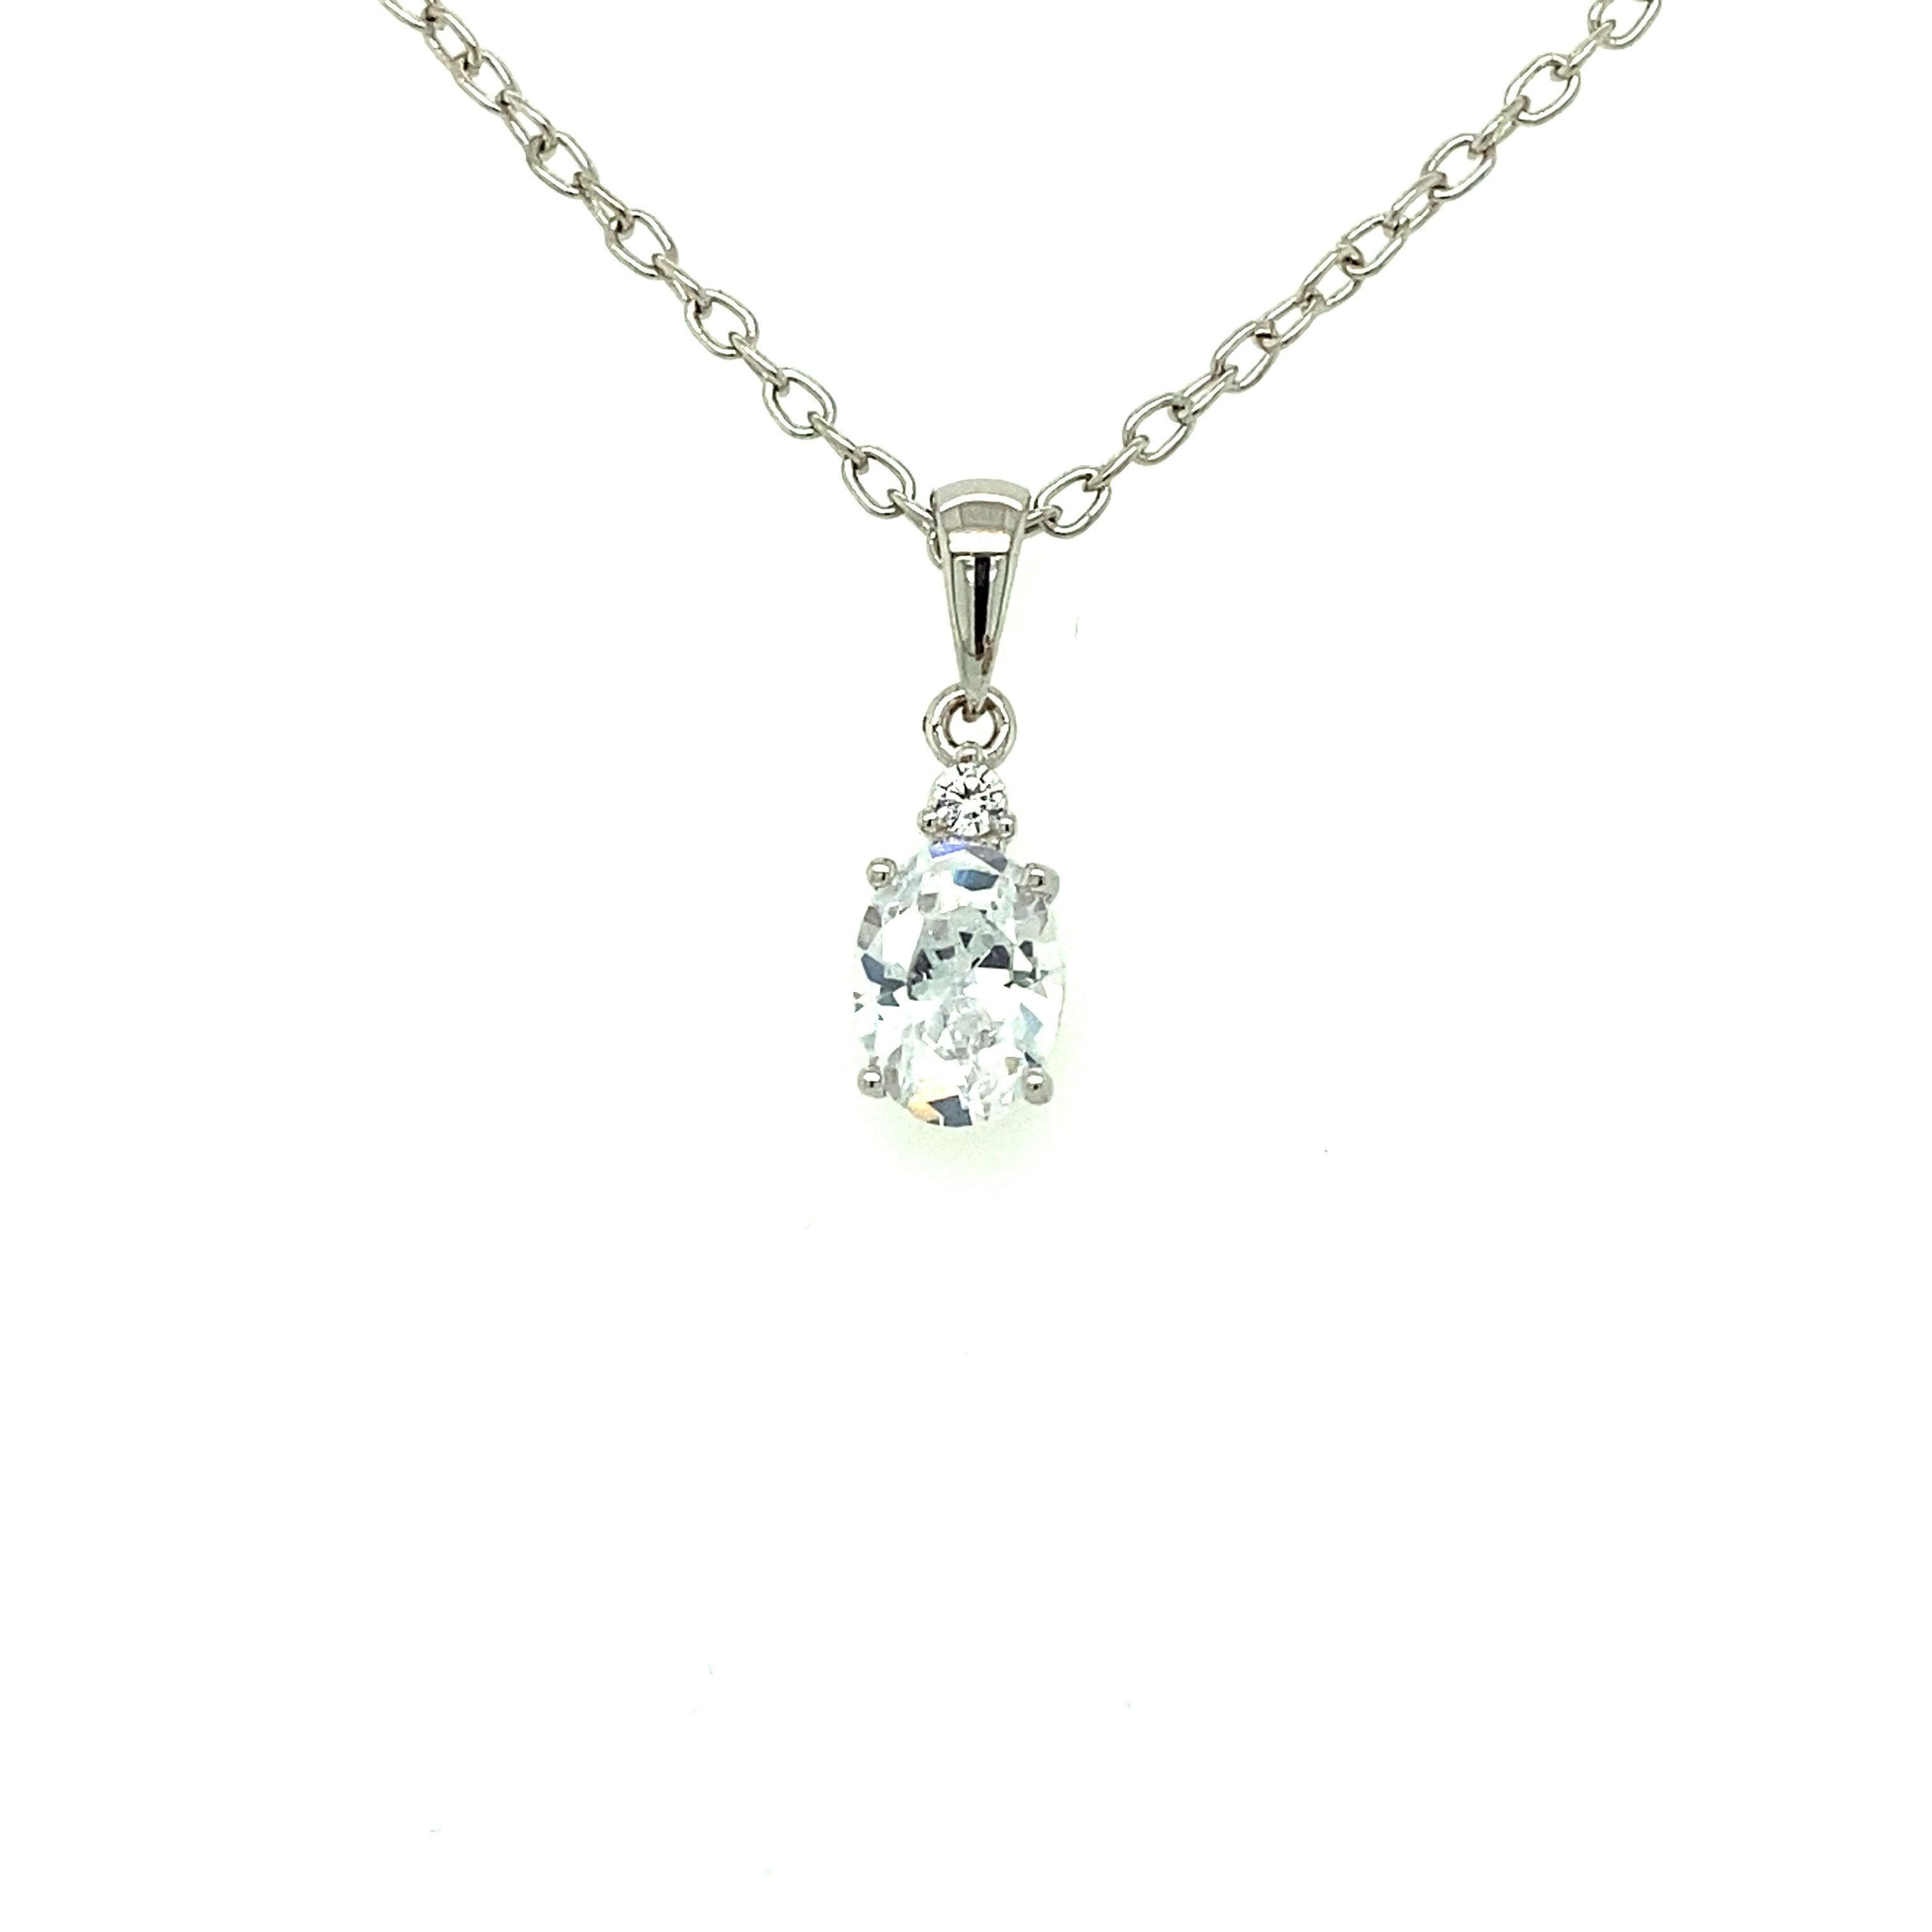 Asfour Crystal Silver Accessories Necklace TP22171-W - 925 Sterling Silver